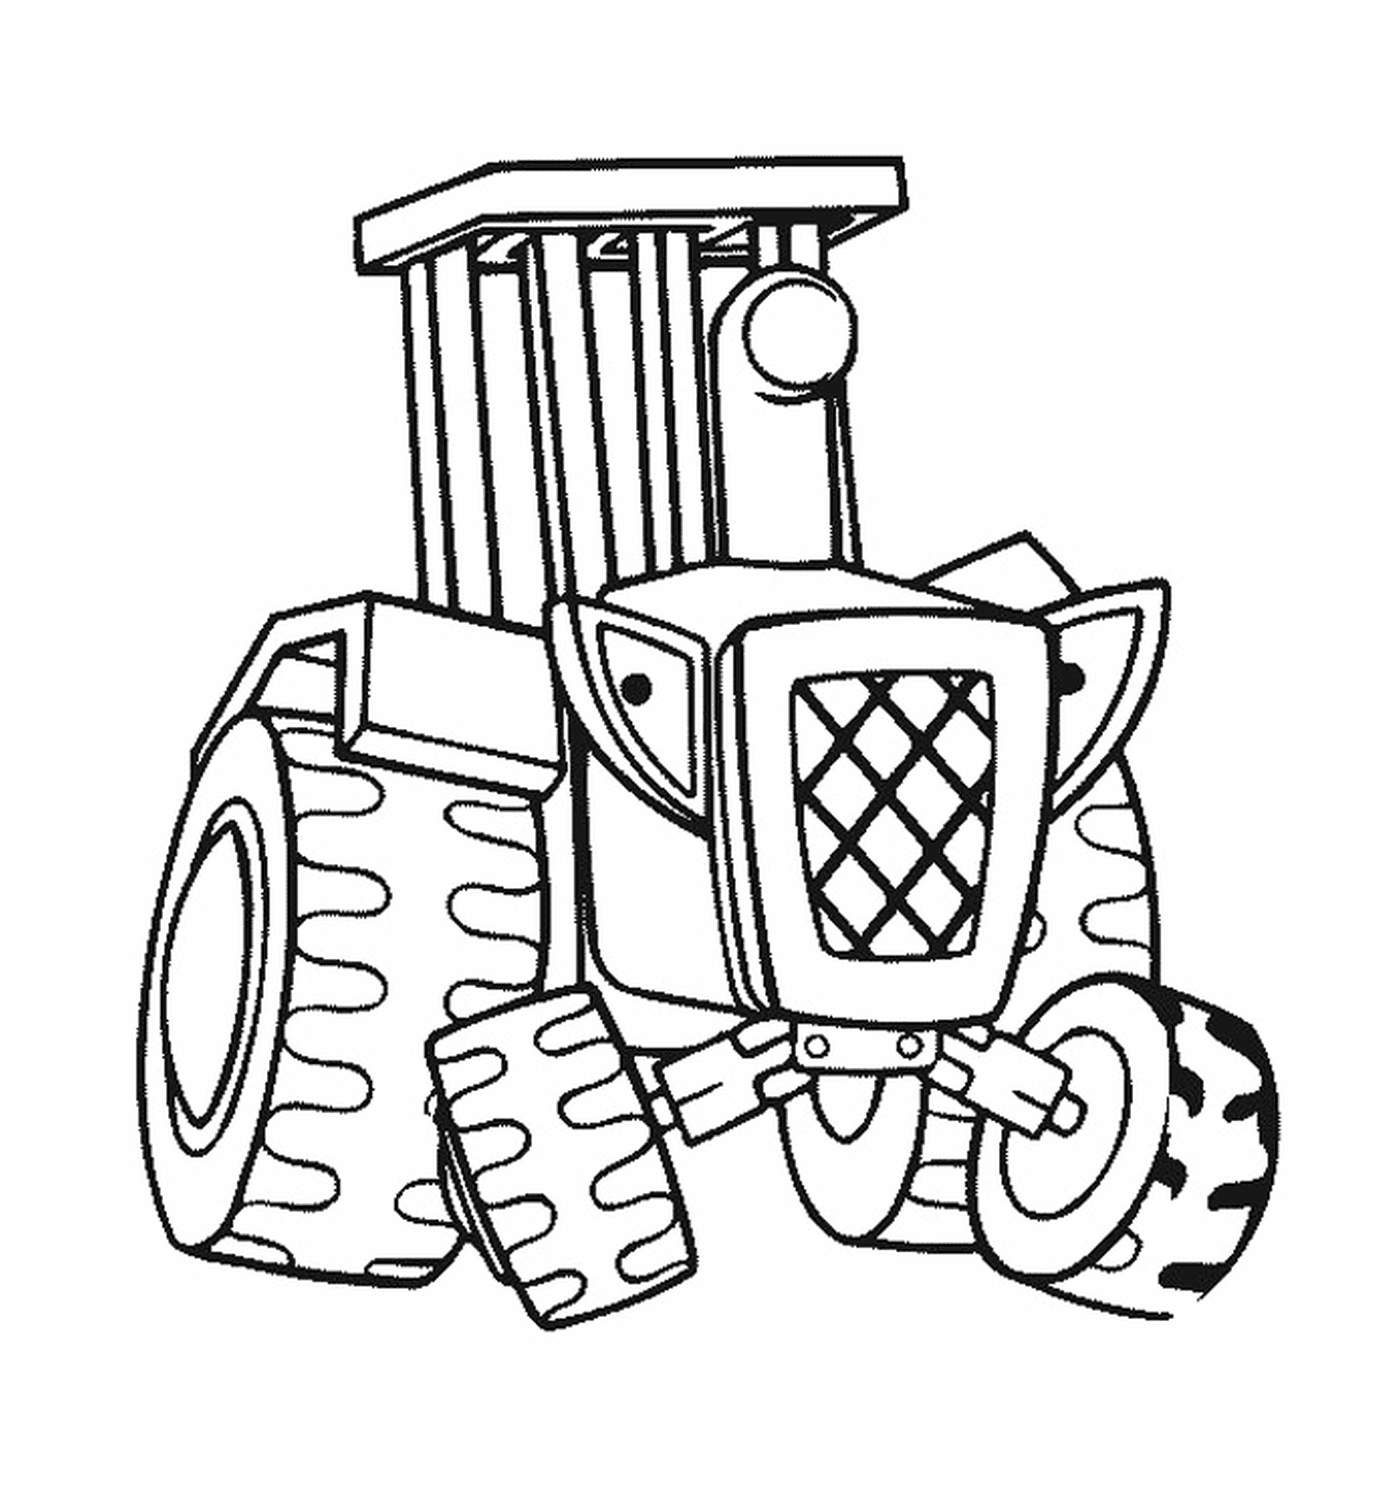  A tractor depicted in a drawing 